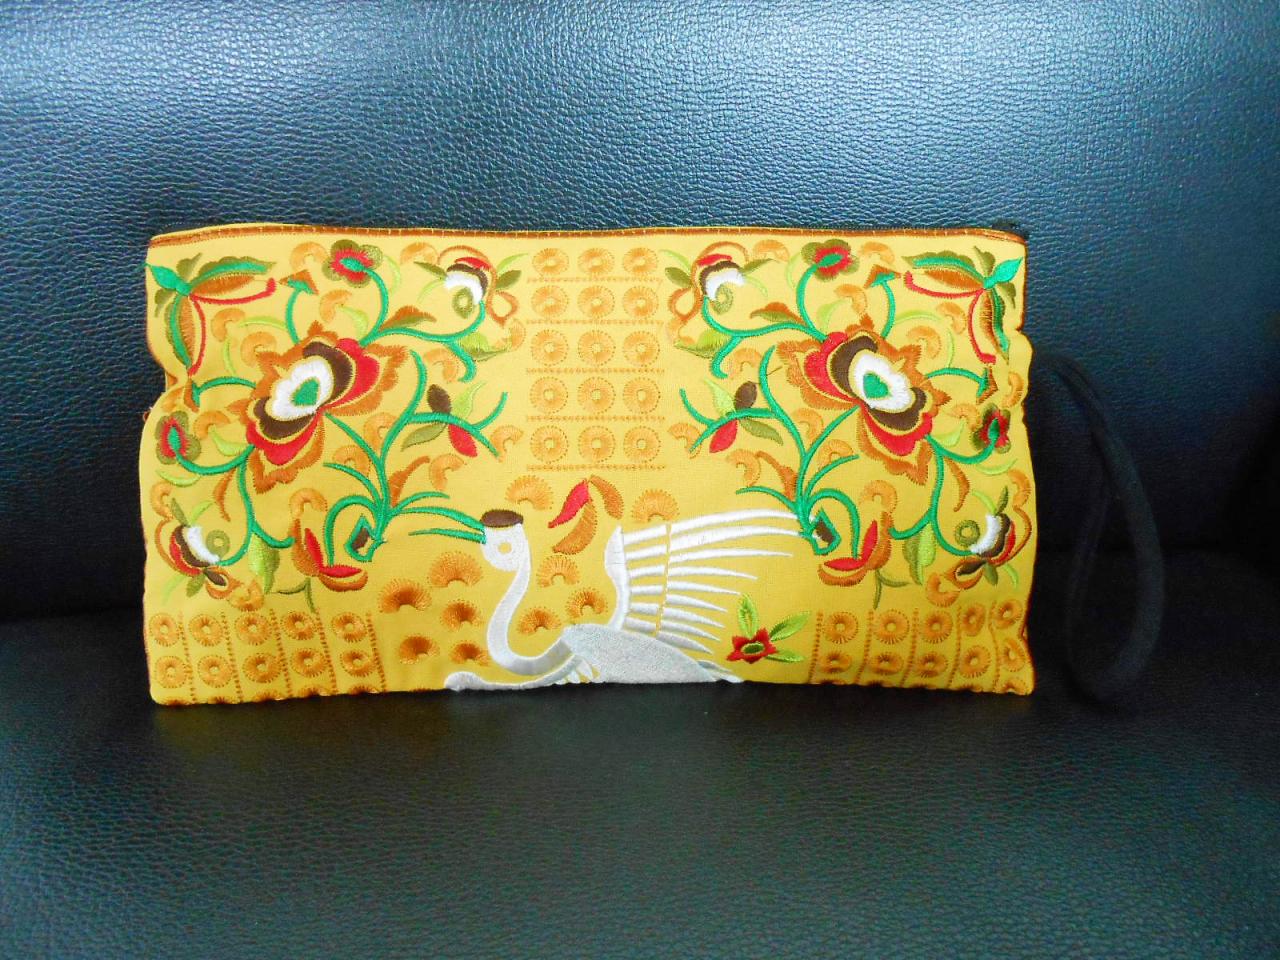 Yellow Flamingo Embroidered Clutch Bag, W/ Yellow Fabric Chinese Hmong Hilltribe Handmade In Thailand. (kp1056-goye)